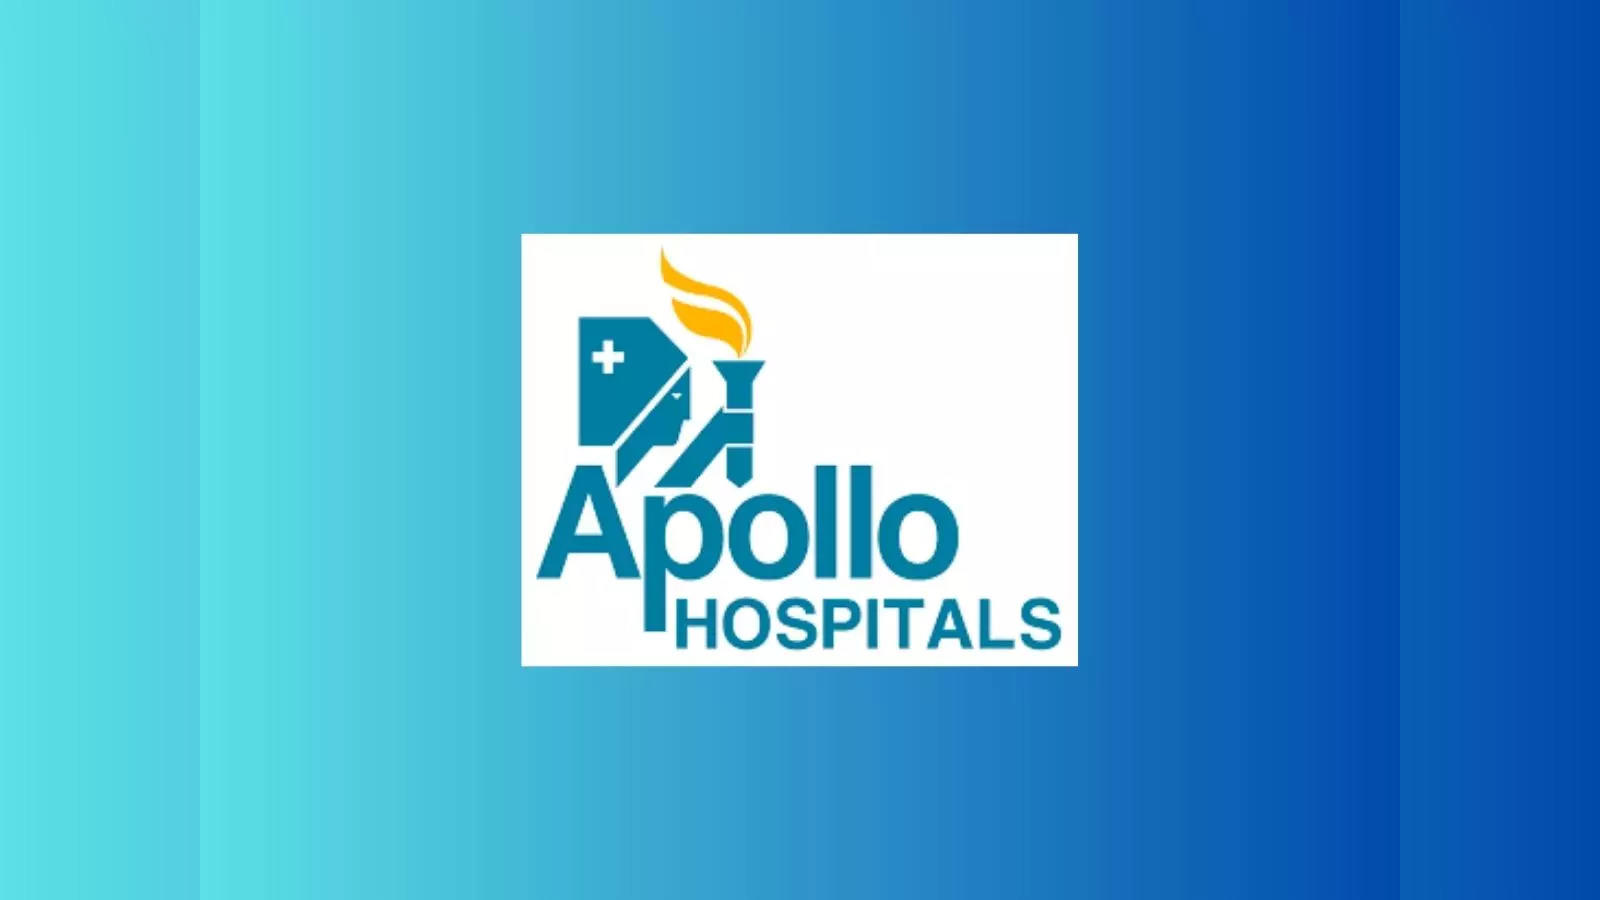 US' top medical body collaborates with Apollo Hospitals - The Economic Times